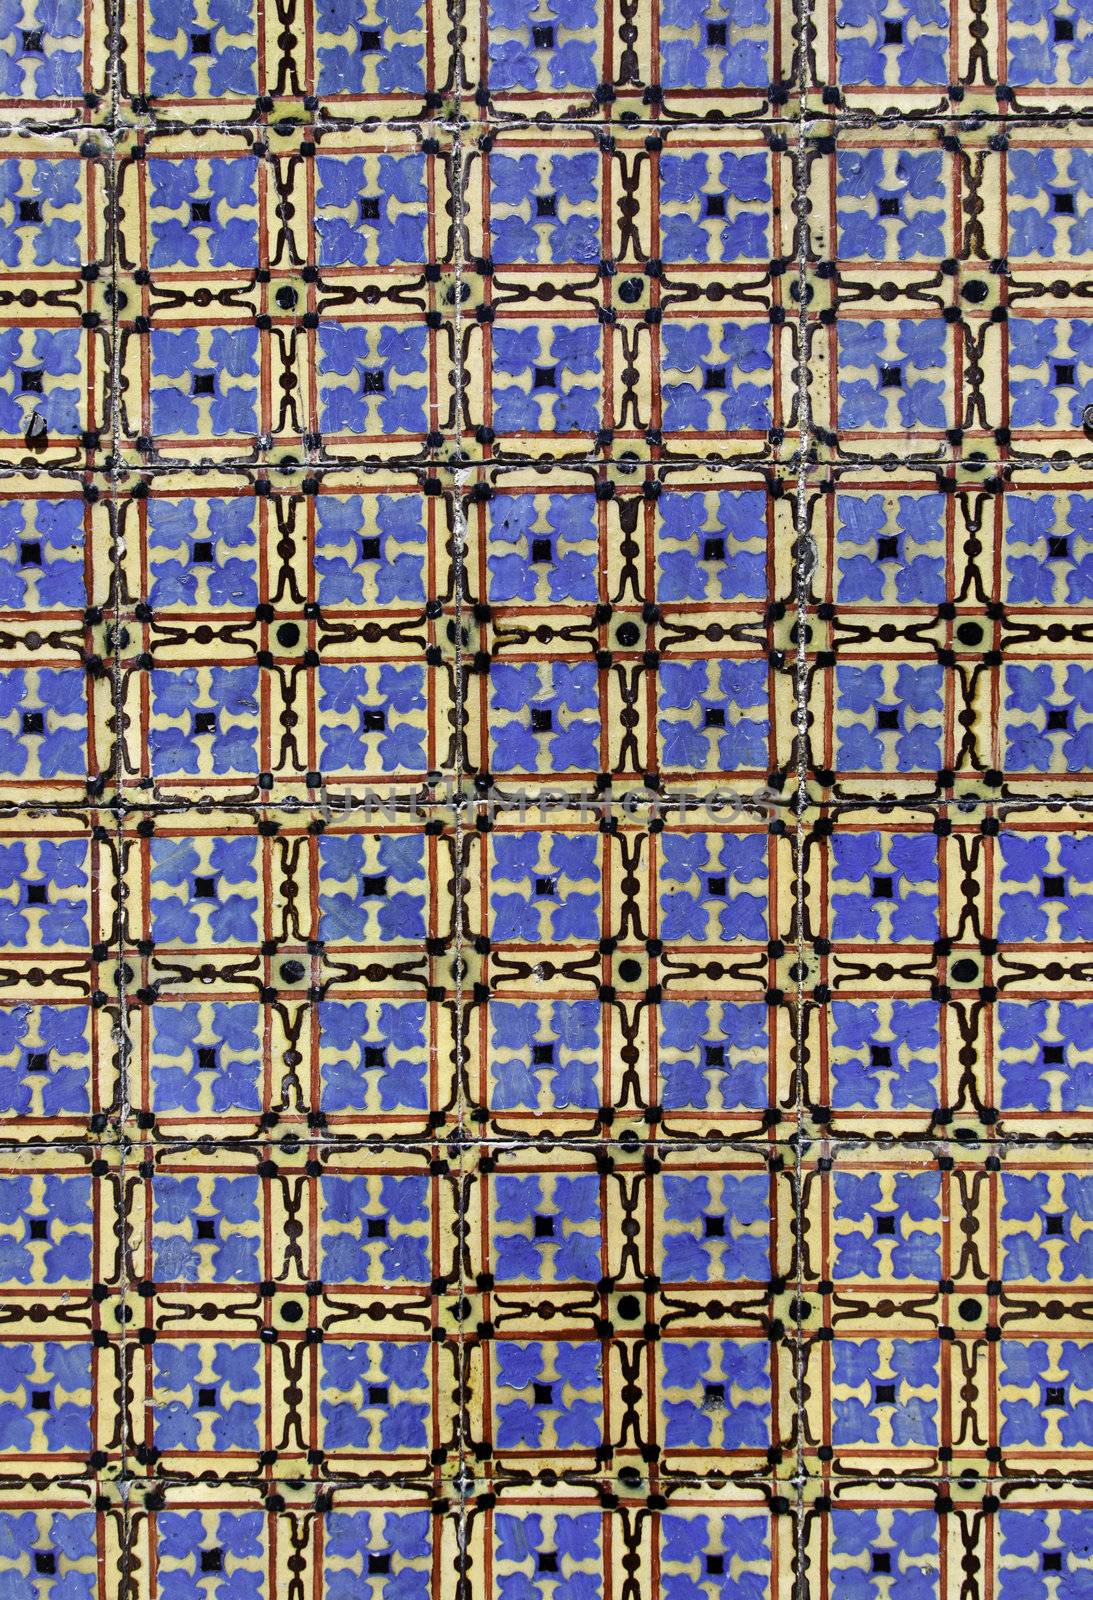 Antique tiles from Portugal by esebene